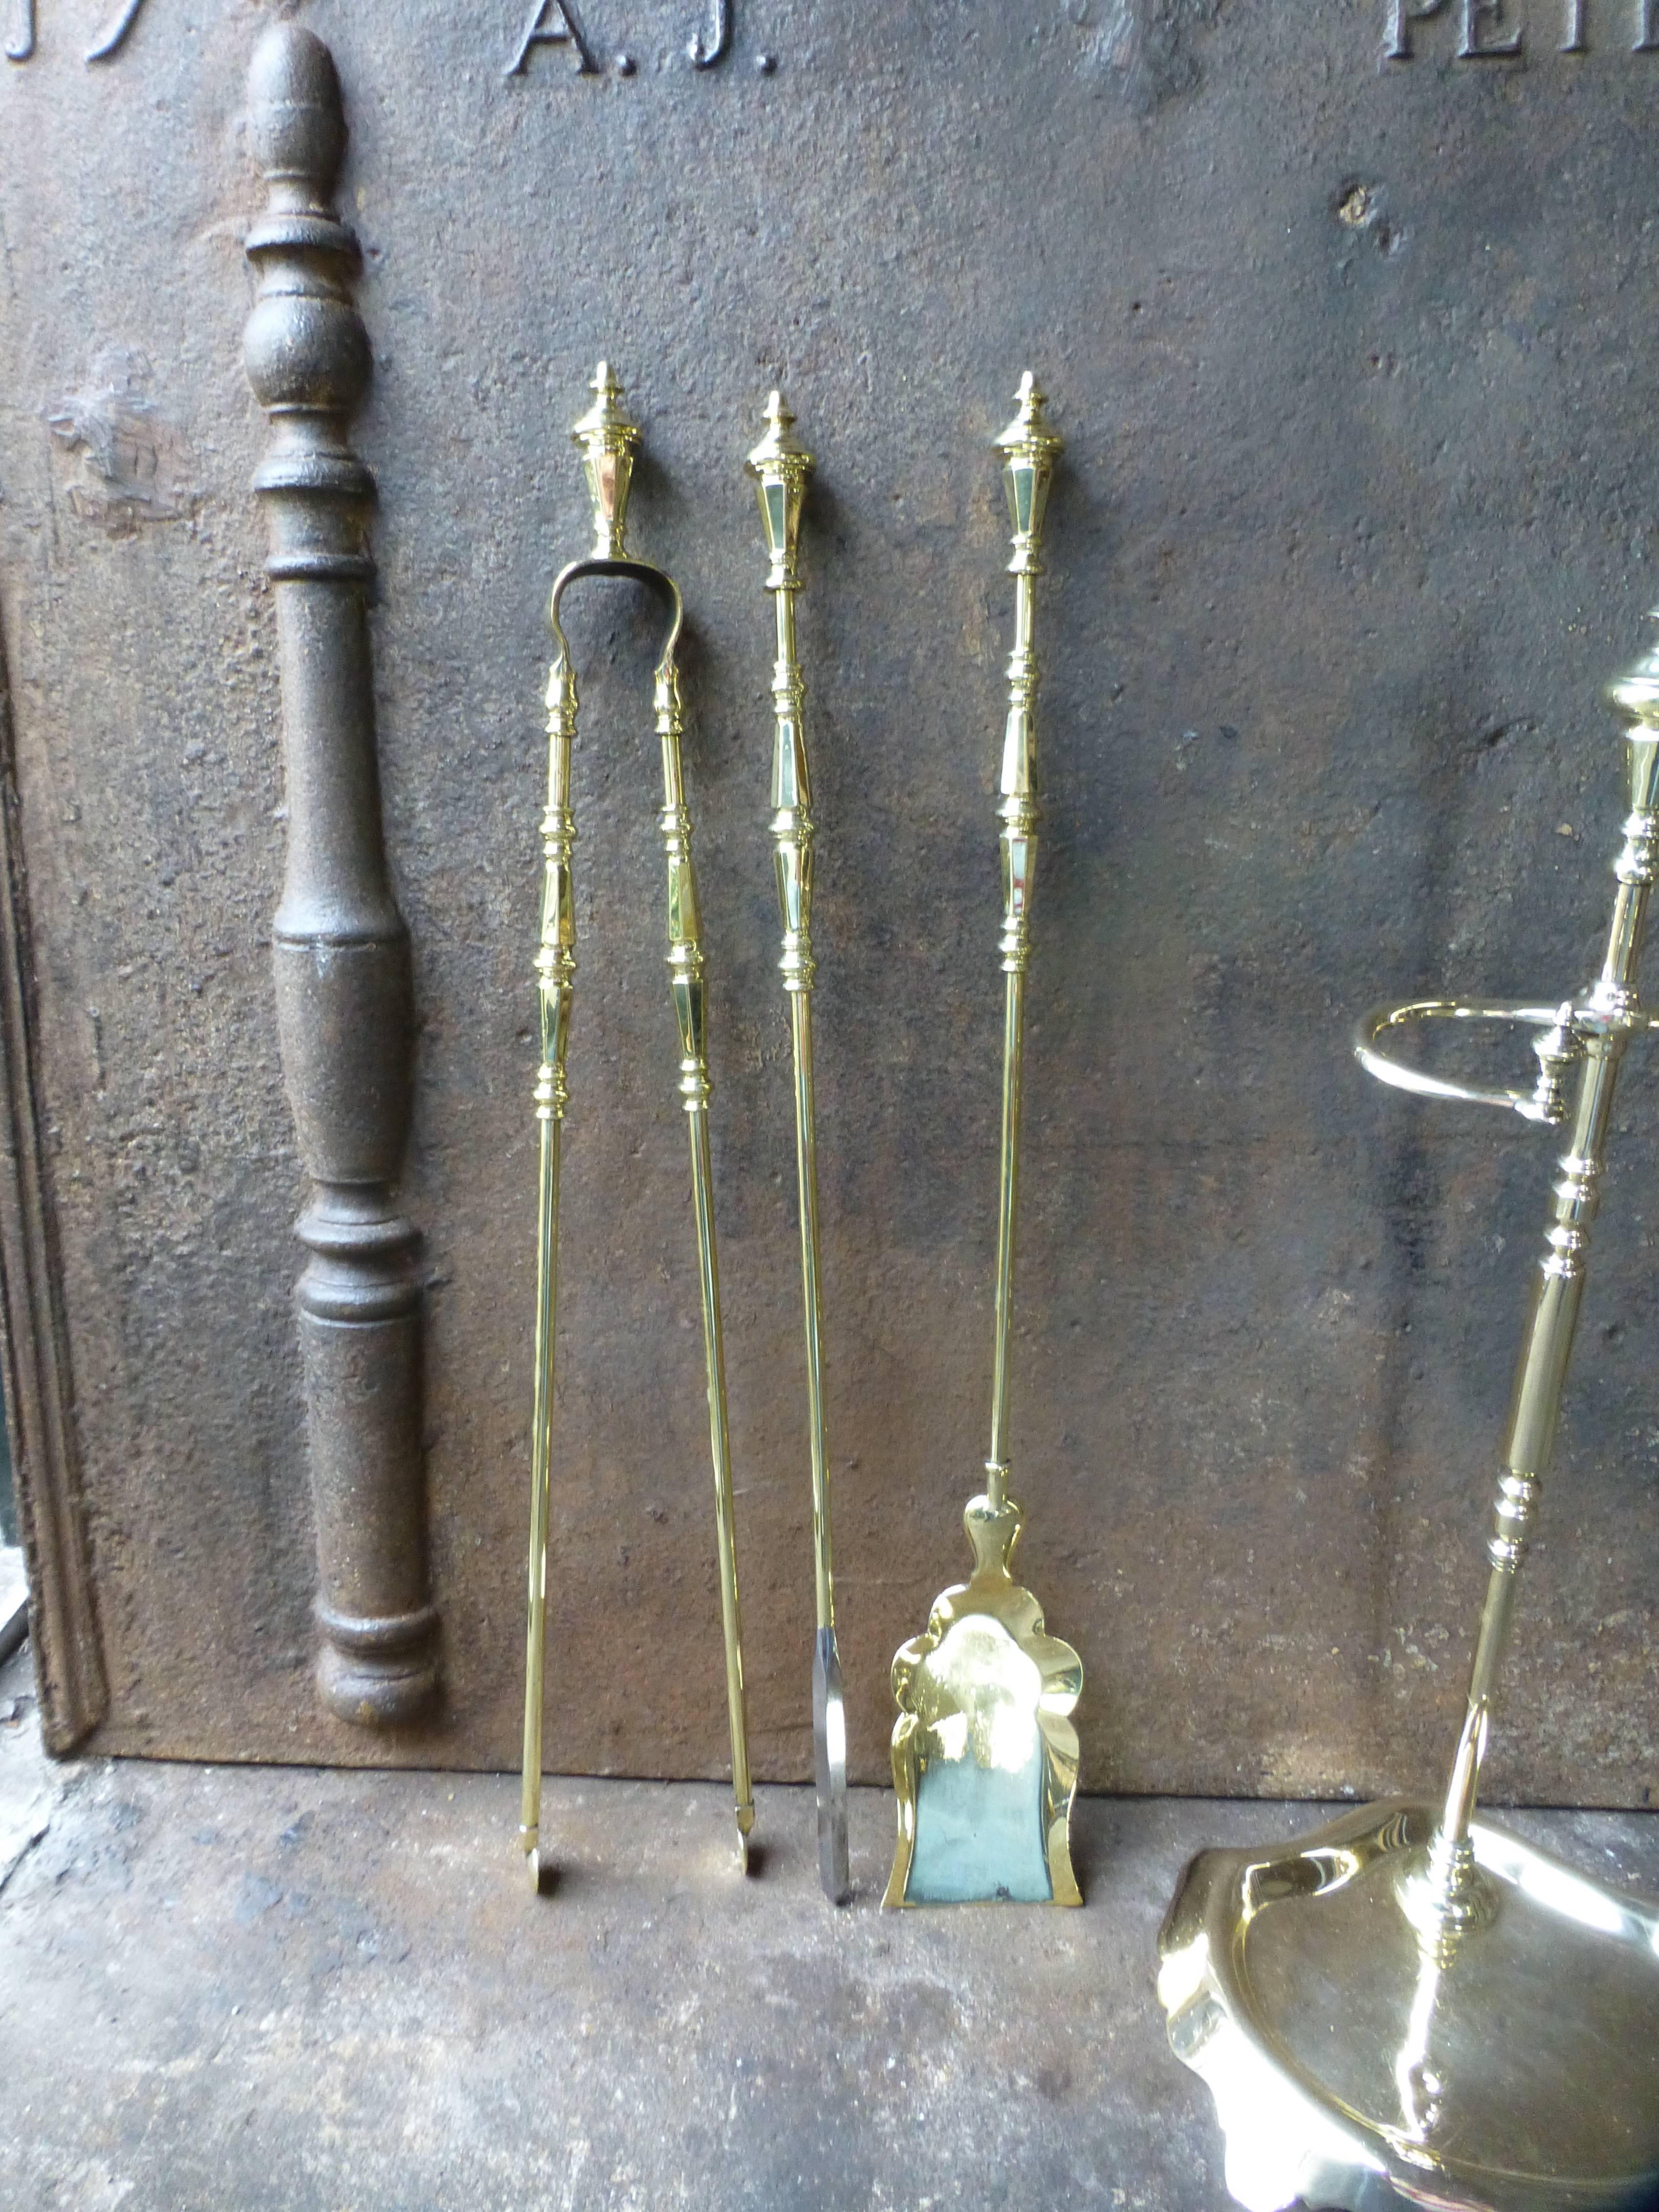 19th century French fire tools, fire irons made of brass. The set is signed by Bouhon Frères.